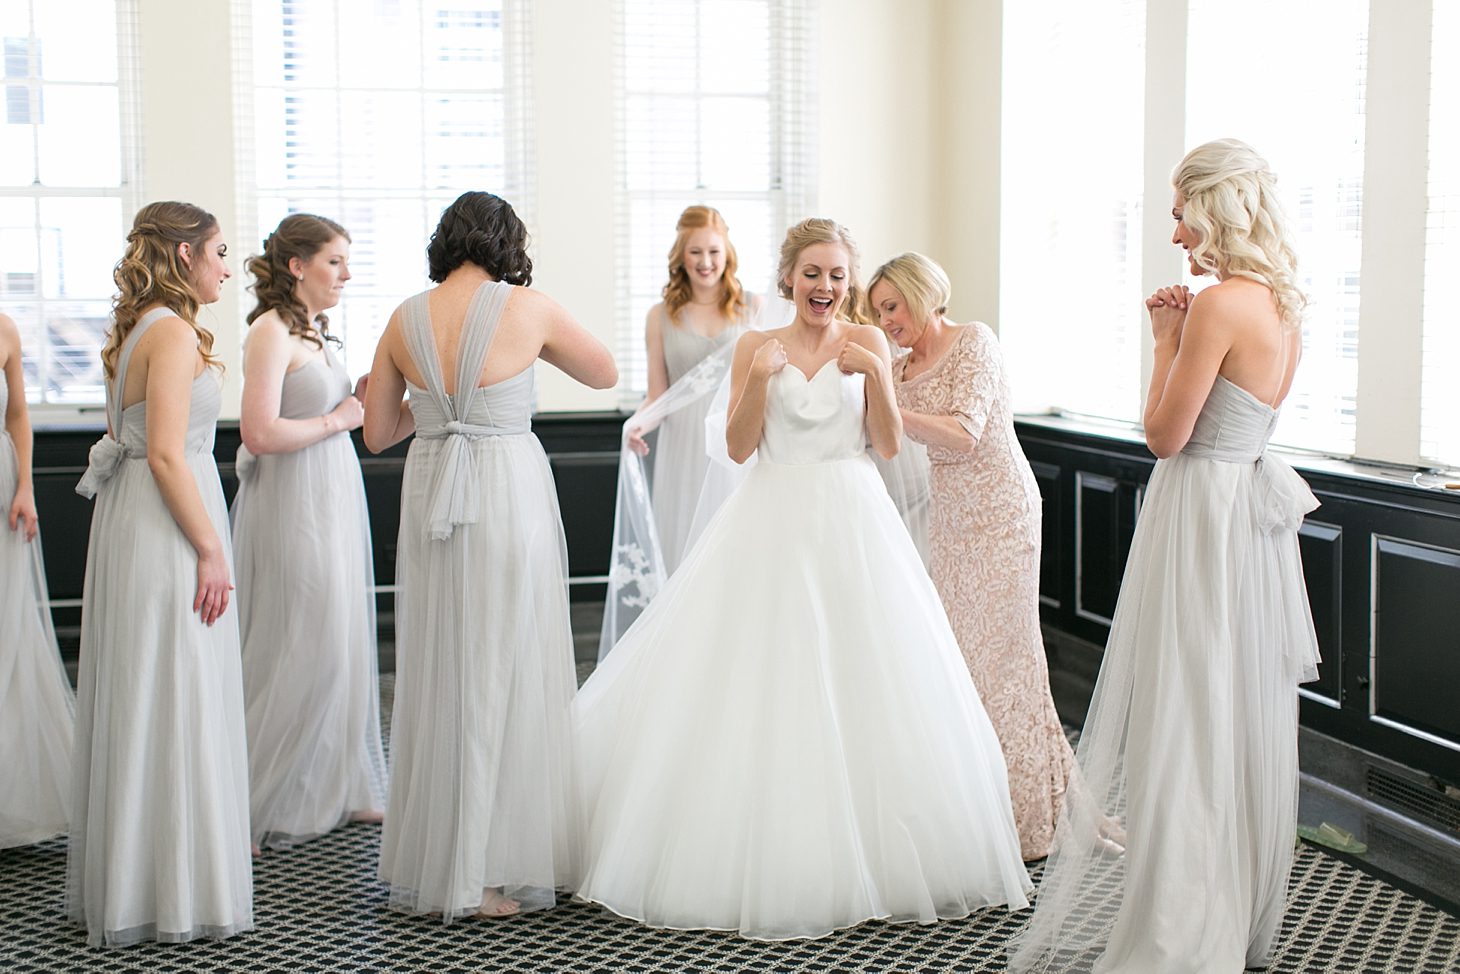 Woman's Athletic Club of Chicago Wedding by Christy Tyler Photography_0011